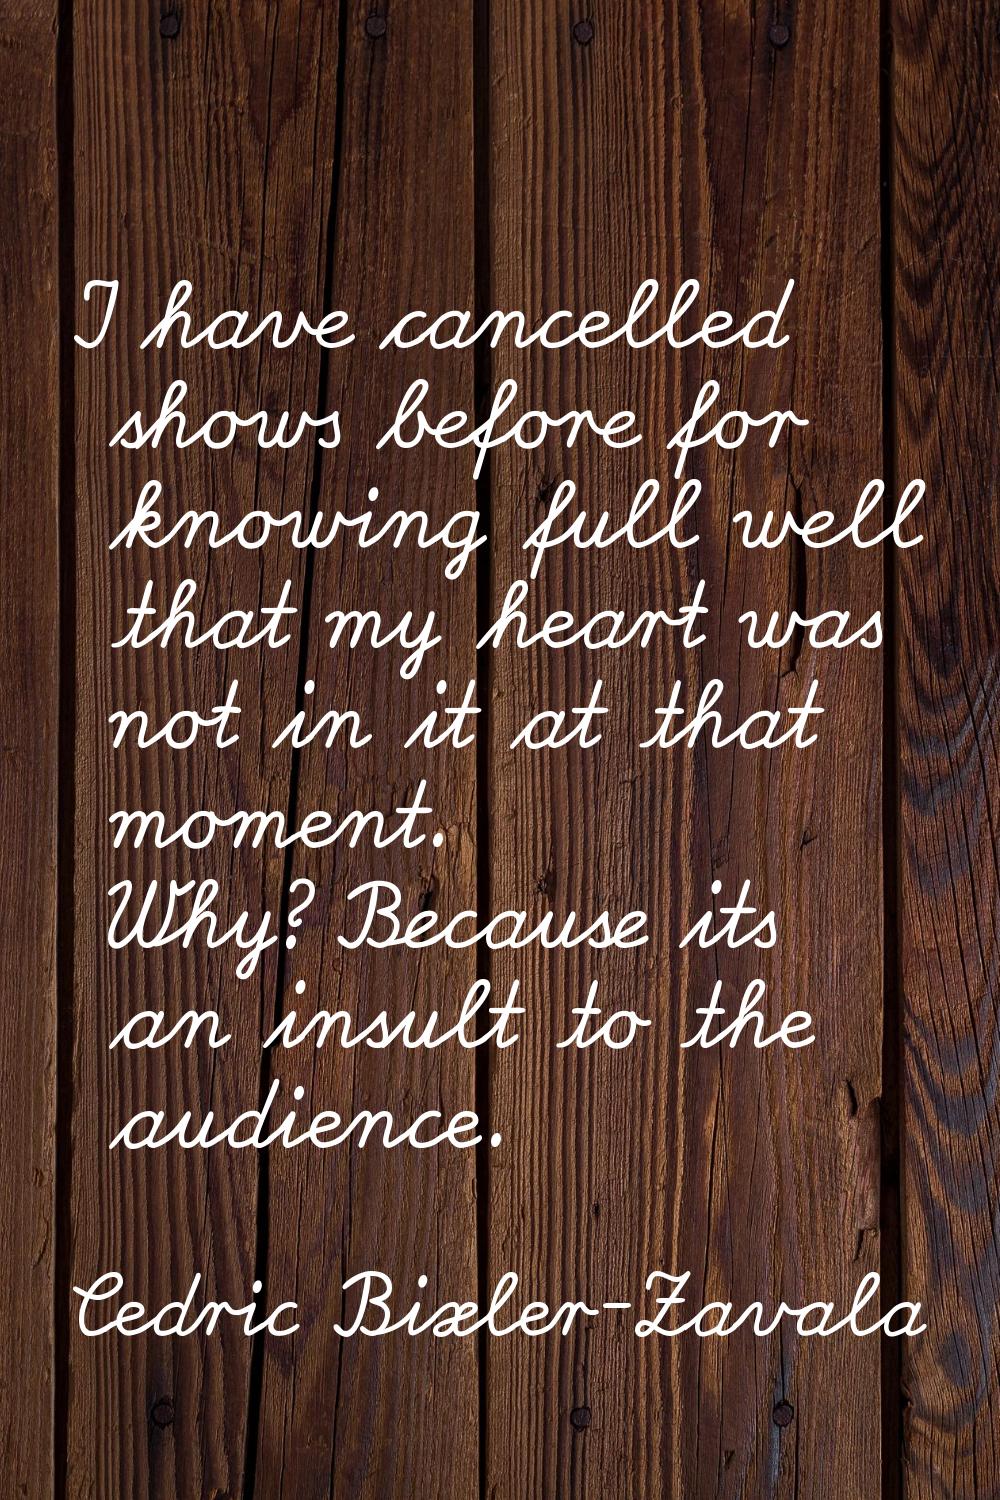 I have cancelled shows before for knowing full well that my heart was not in it at that moment. Why